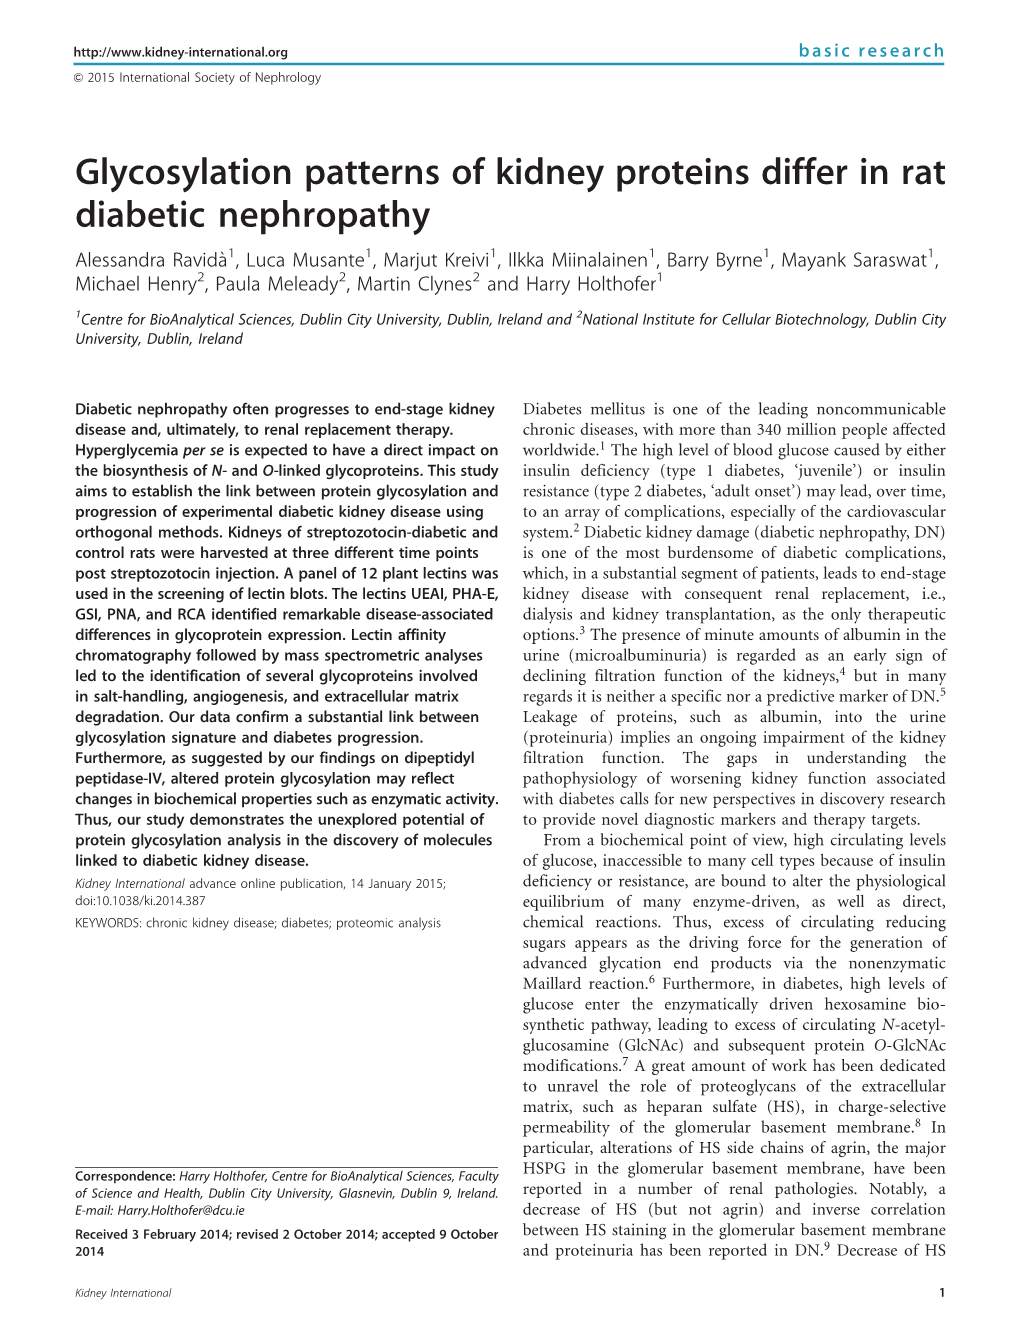 Glycosylation Patterns of Kidney Proteins Differ in Rat Diabetic